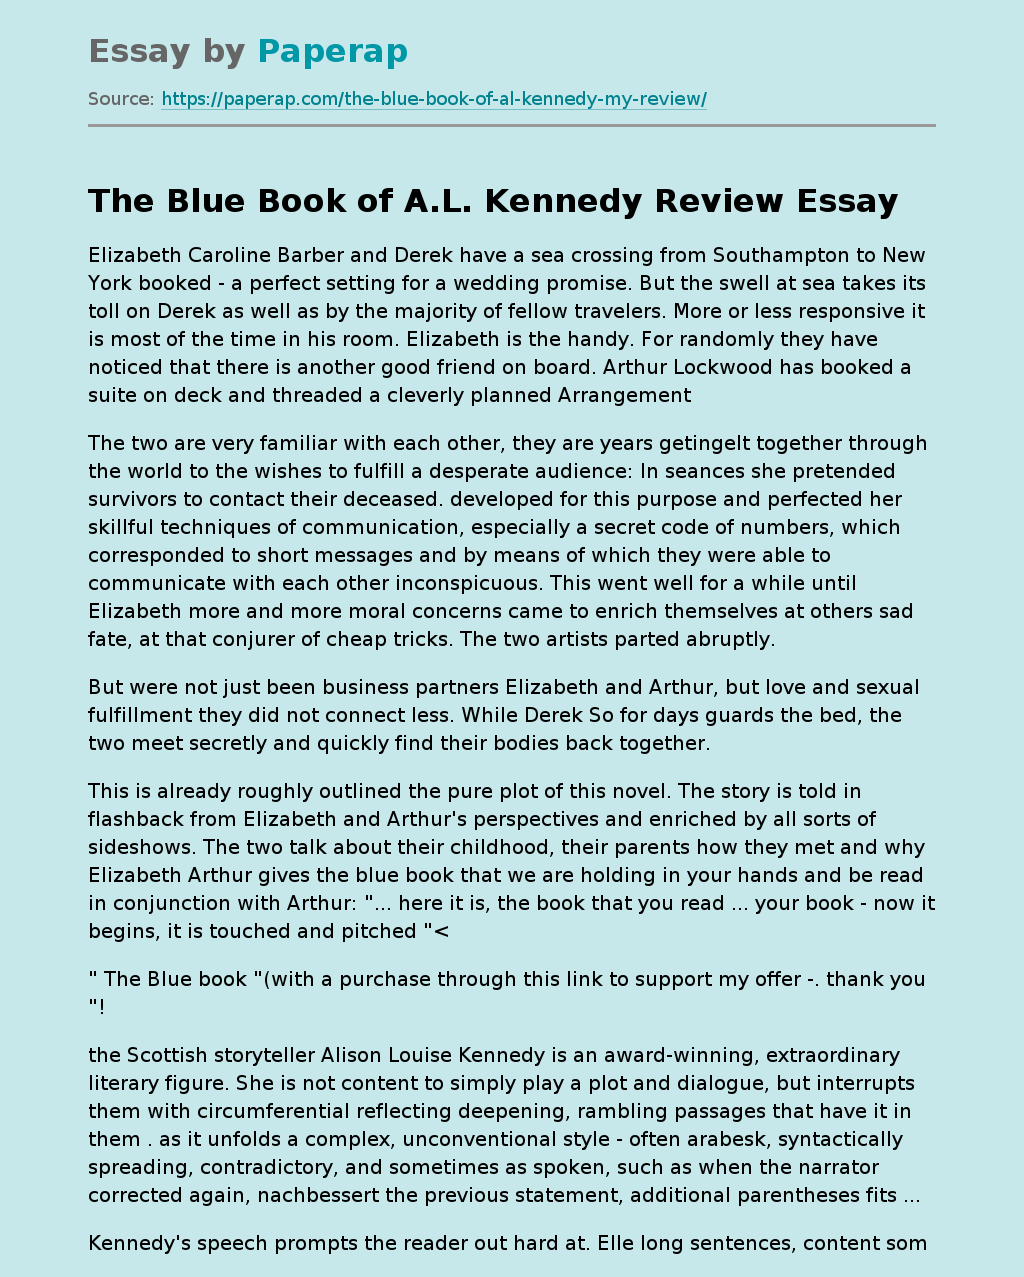 The Blue Book of A.L. Kennedy Review